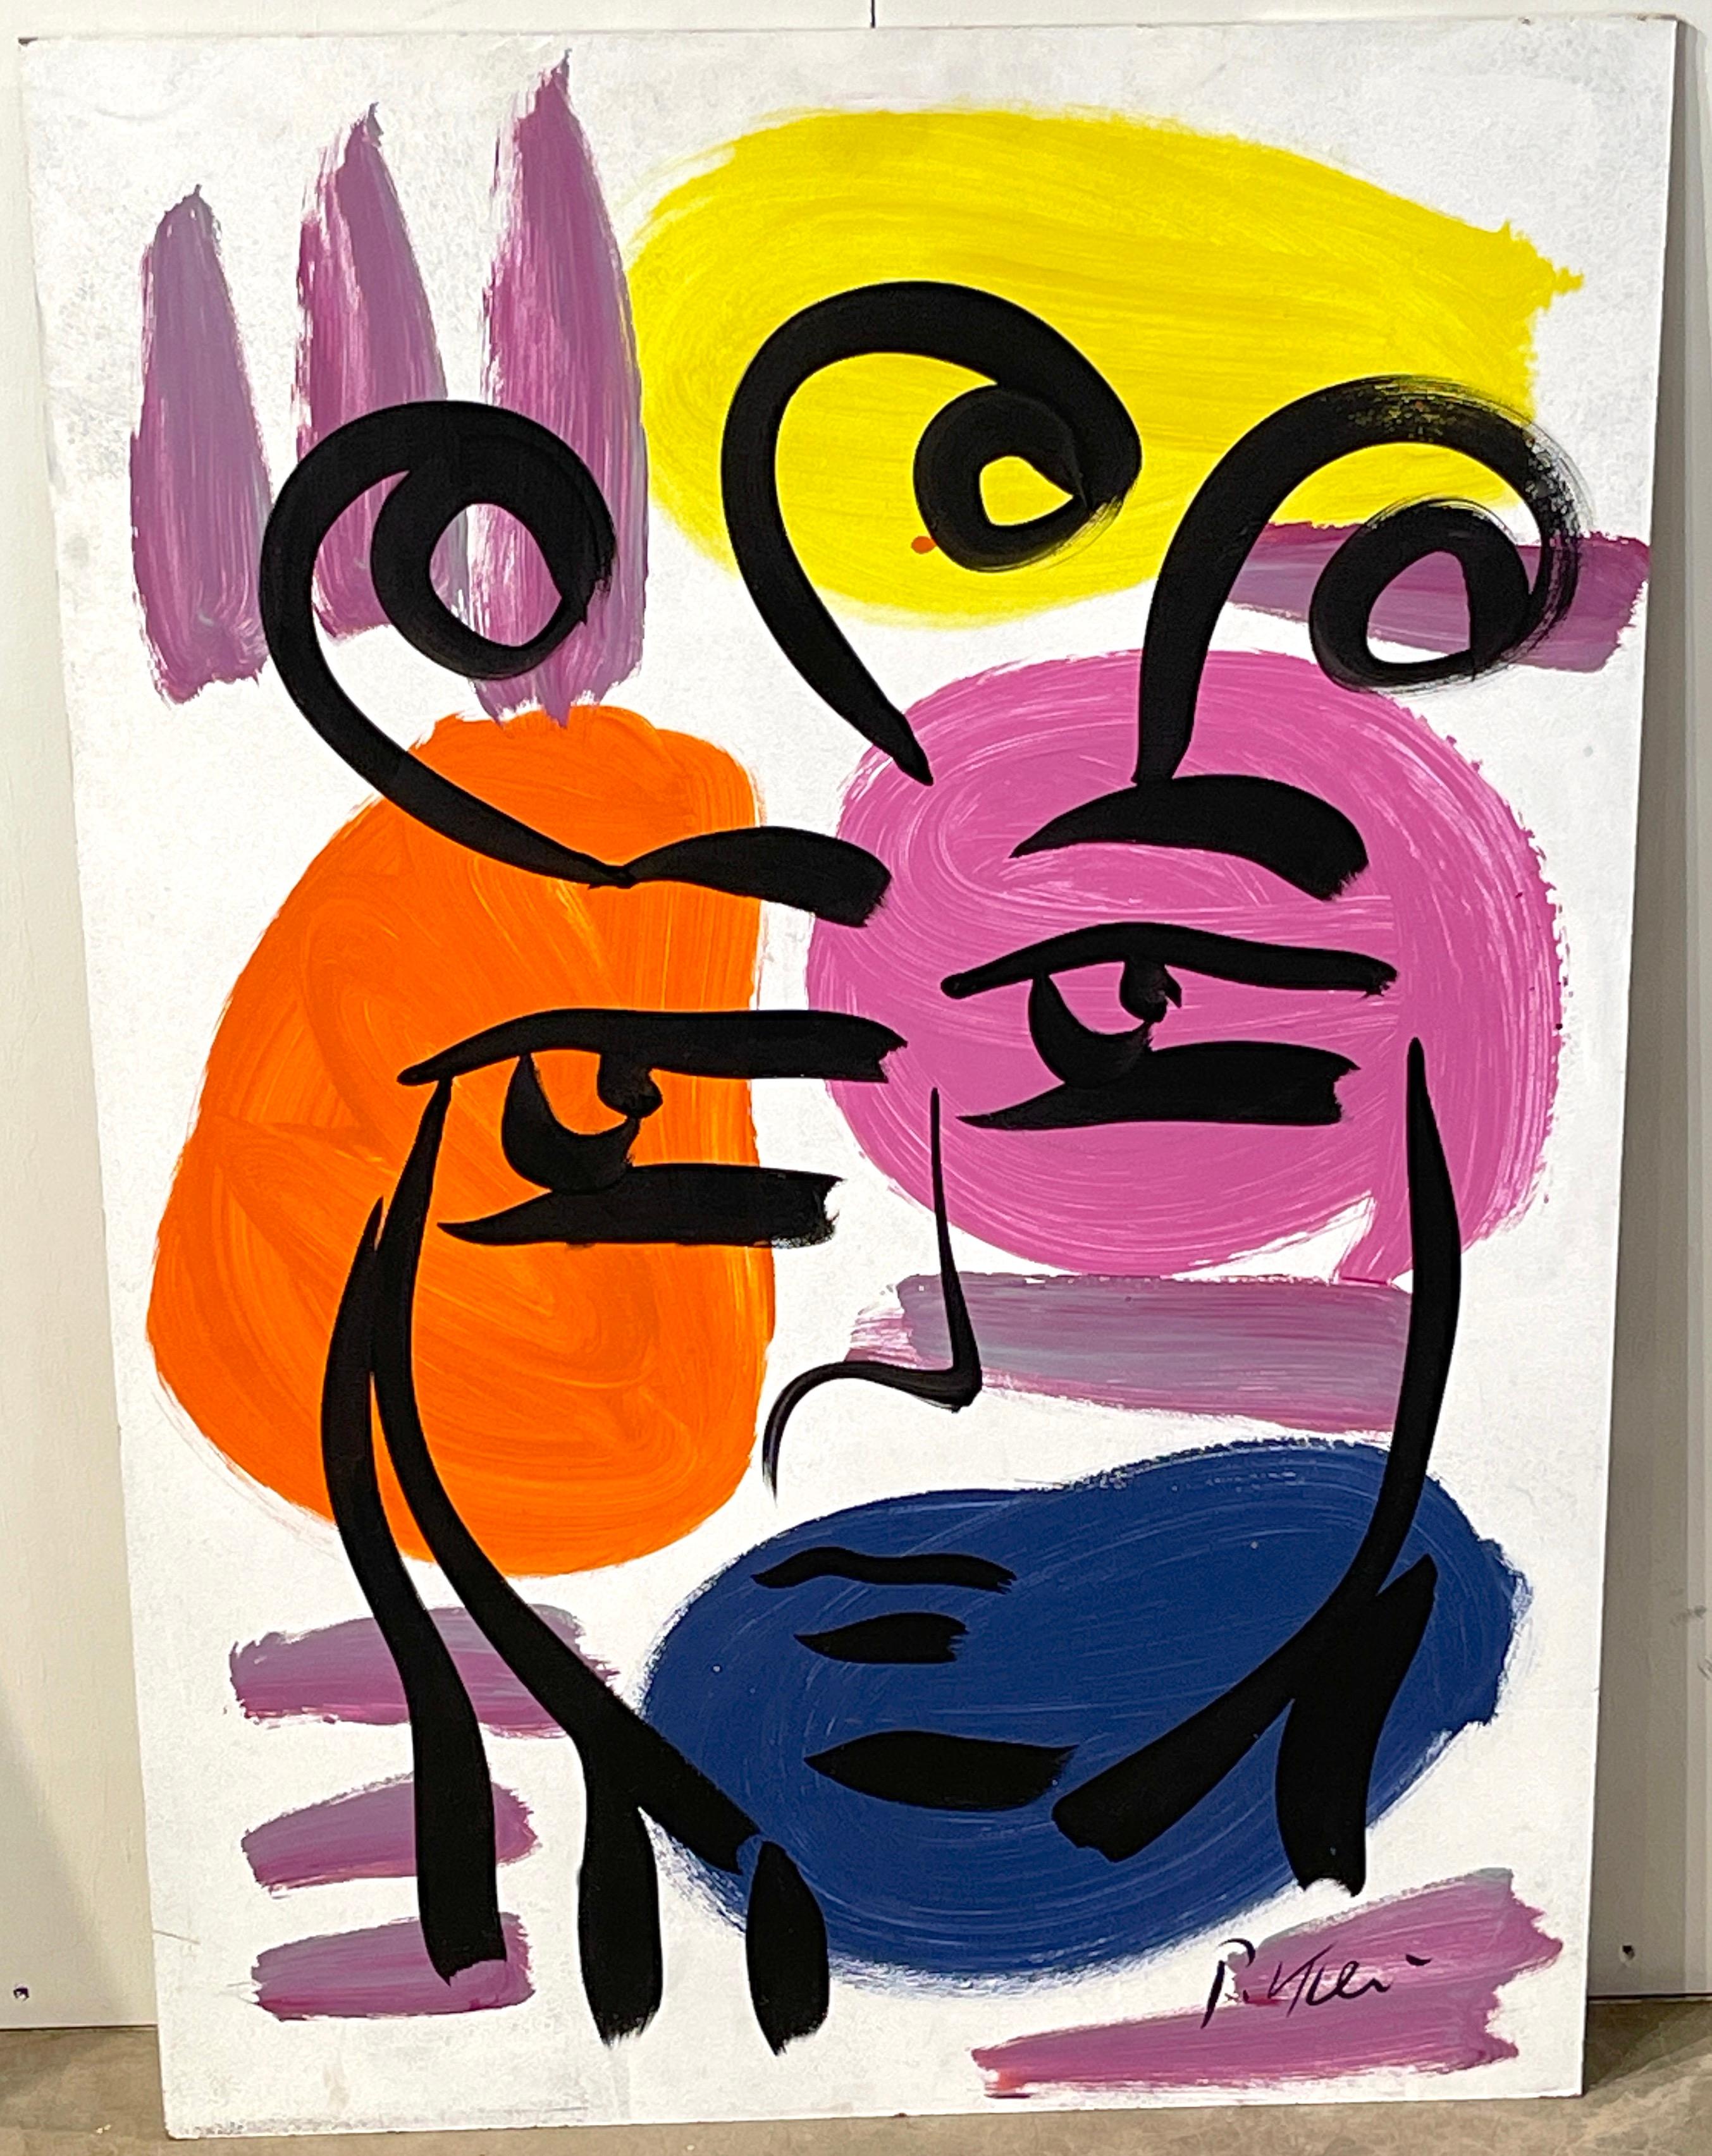 Untitled Portrait - I.
Peter Keil, Berlin, 1970s.
Oil on board, unframed .
Influences o Pablo Picasso and Matisse and Alexander Calder are evident.
A large, well balanced 1970s period work by Peter Keil.
Oil on board, signed and dated lower right,